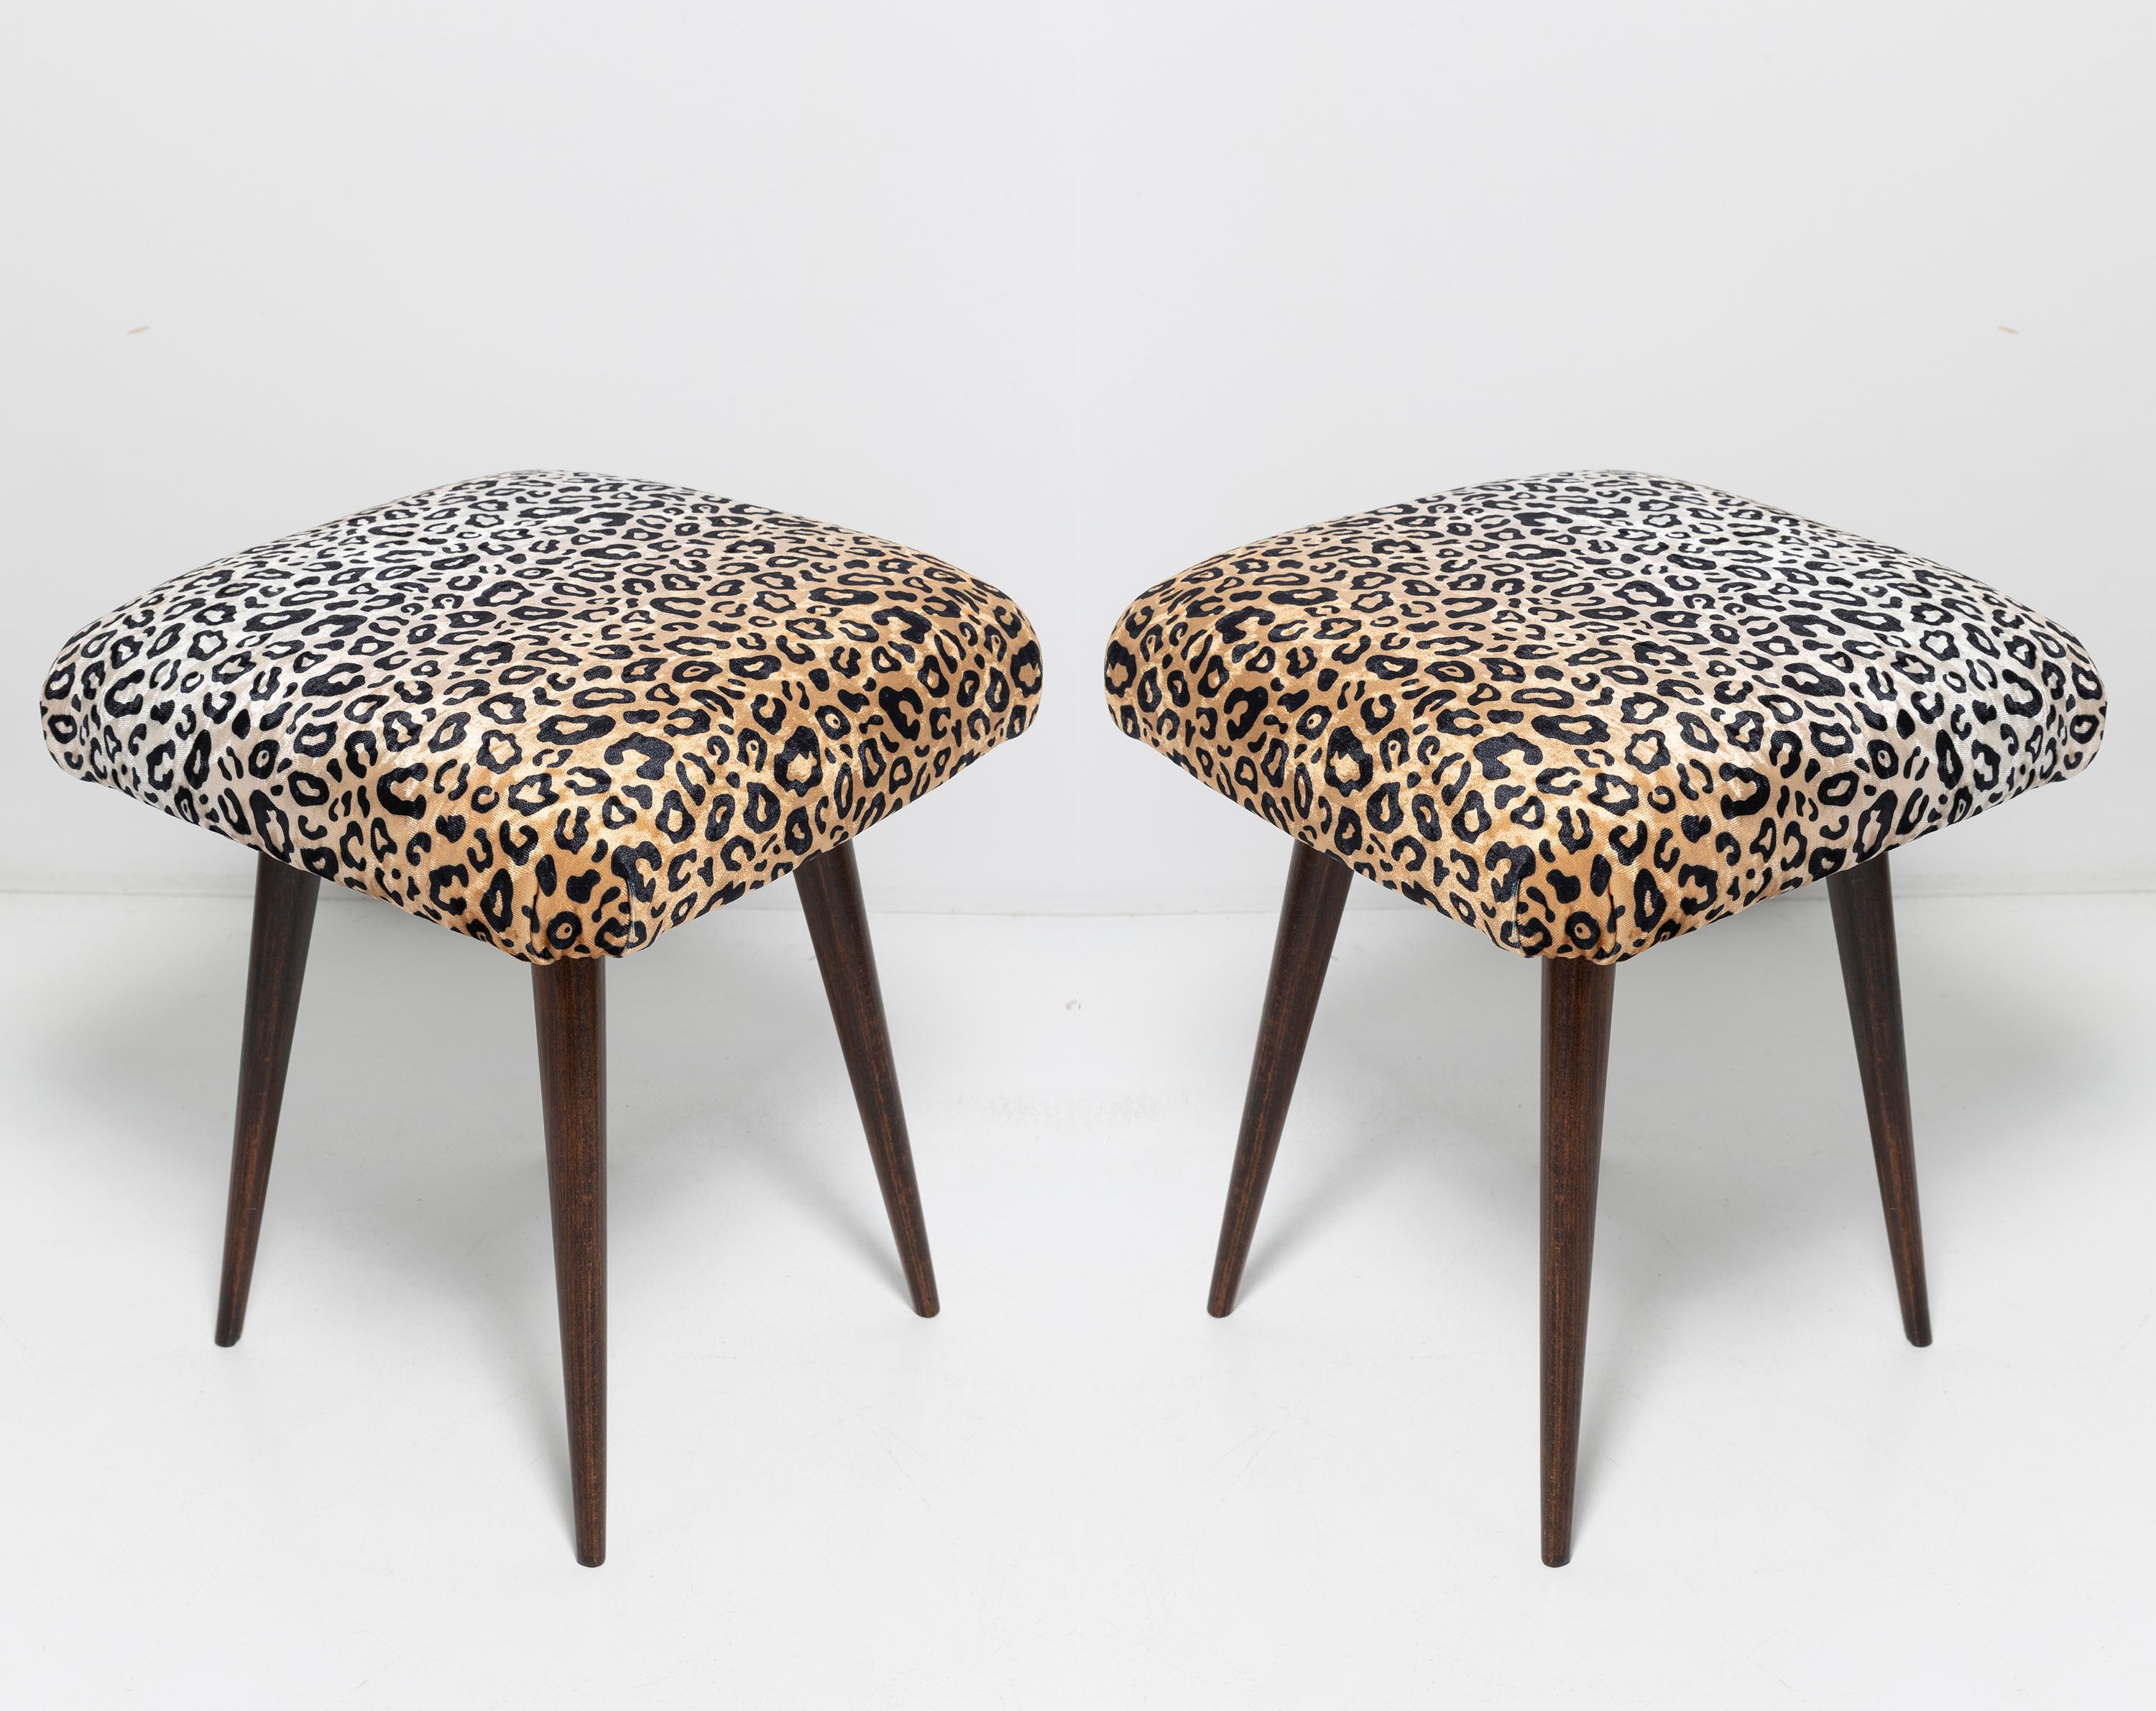 Stools from the turn of the 1960s and 1970s. High-quality printed velvet - soft and very pleasant to the touch, vivid and natural colors - a beautiful, original pattern! The stools consists of an upholstered part, a seat and wooden legs narrowing